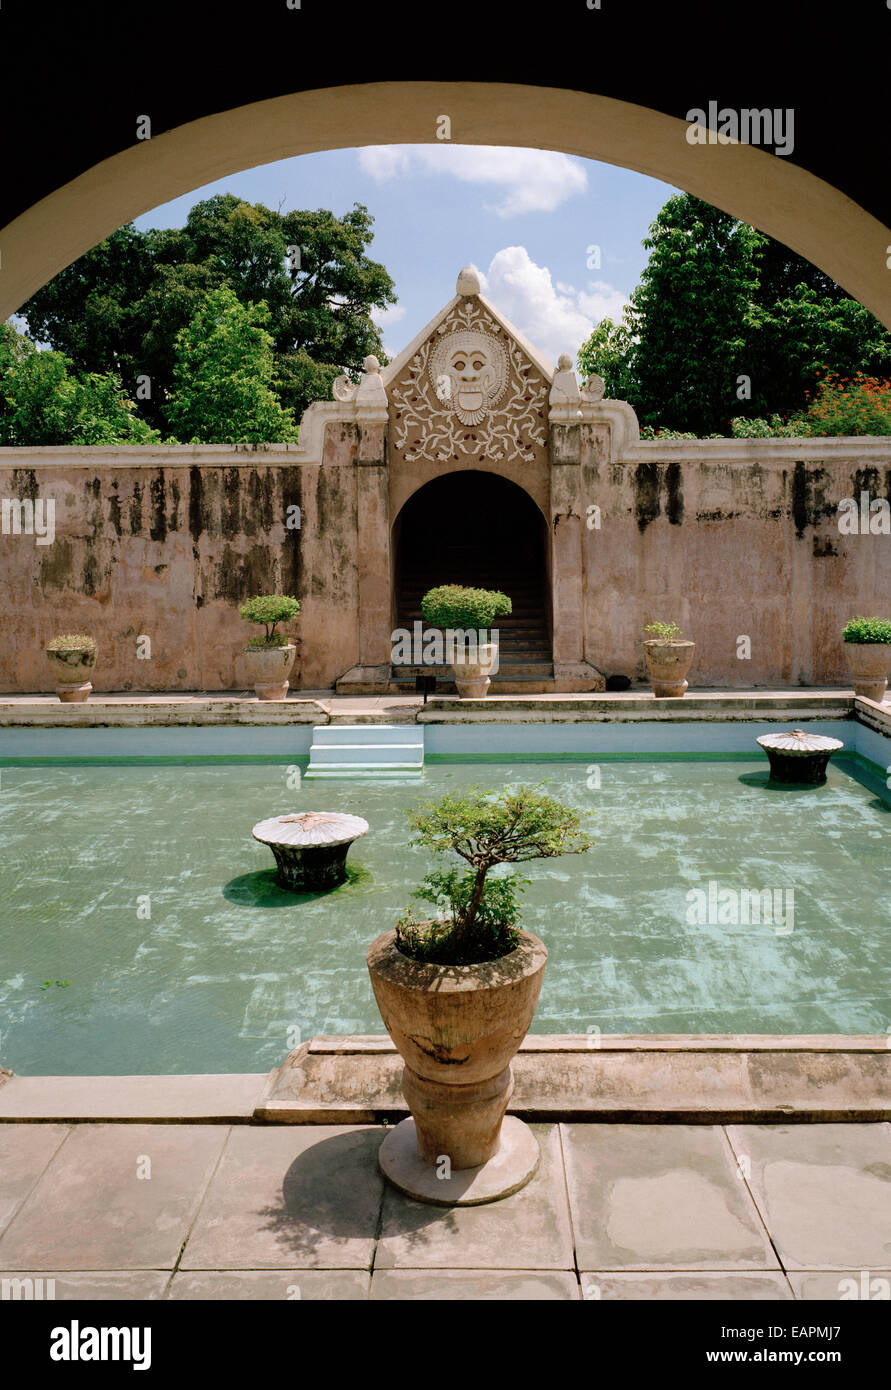 Bathing Complex in Taman Sari Water Castle the Yogyakarta Sultanate Royal Garden in Yogya in Indonesia in Southeast Asia. Tourism Tourist Site Stock Photo